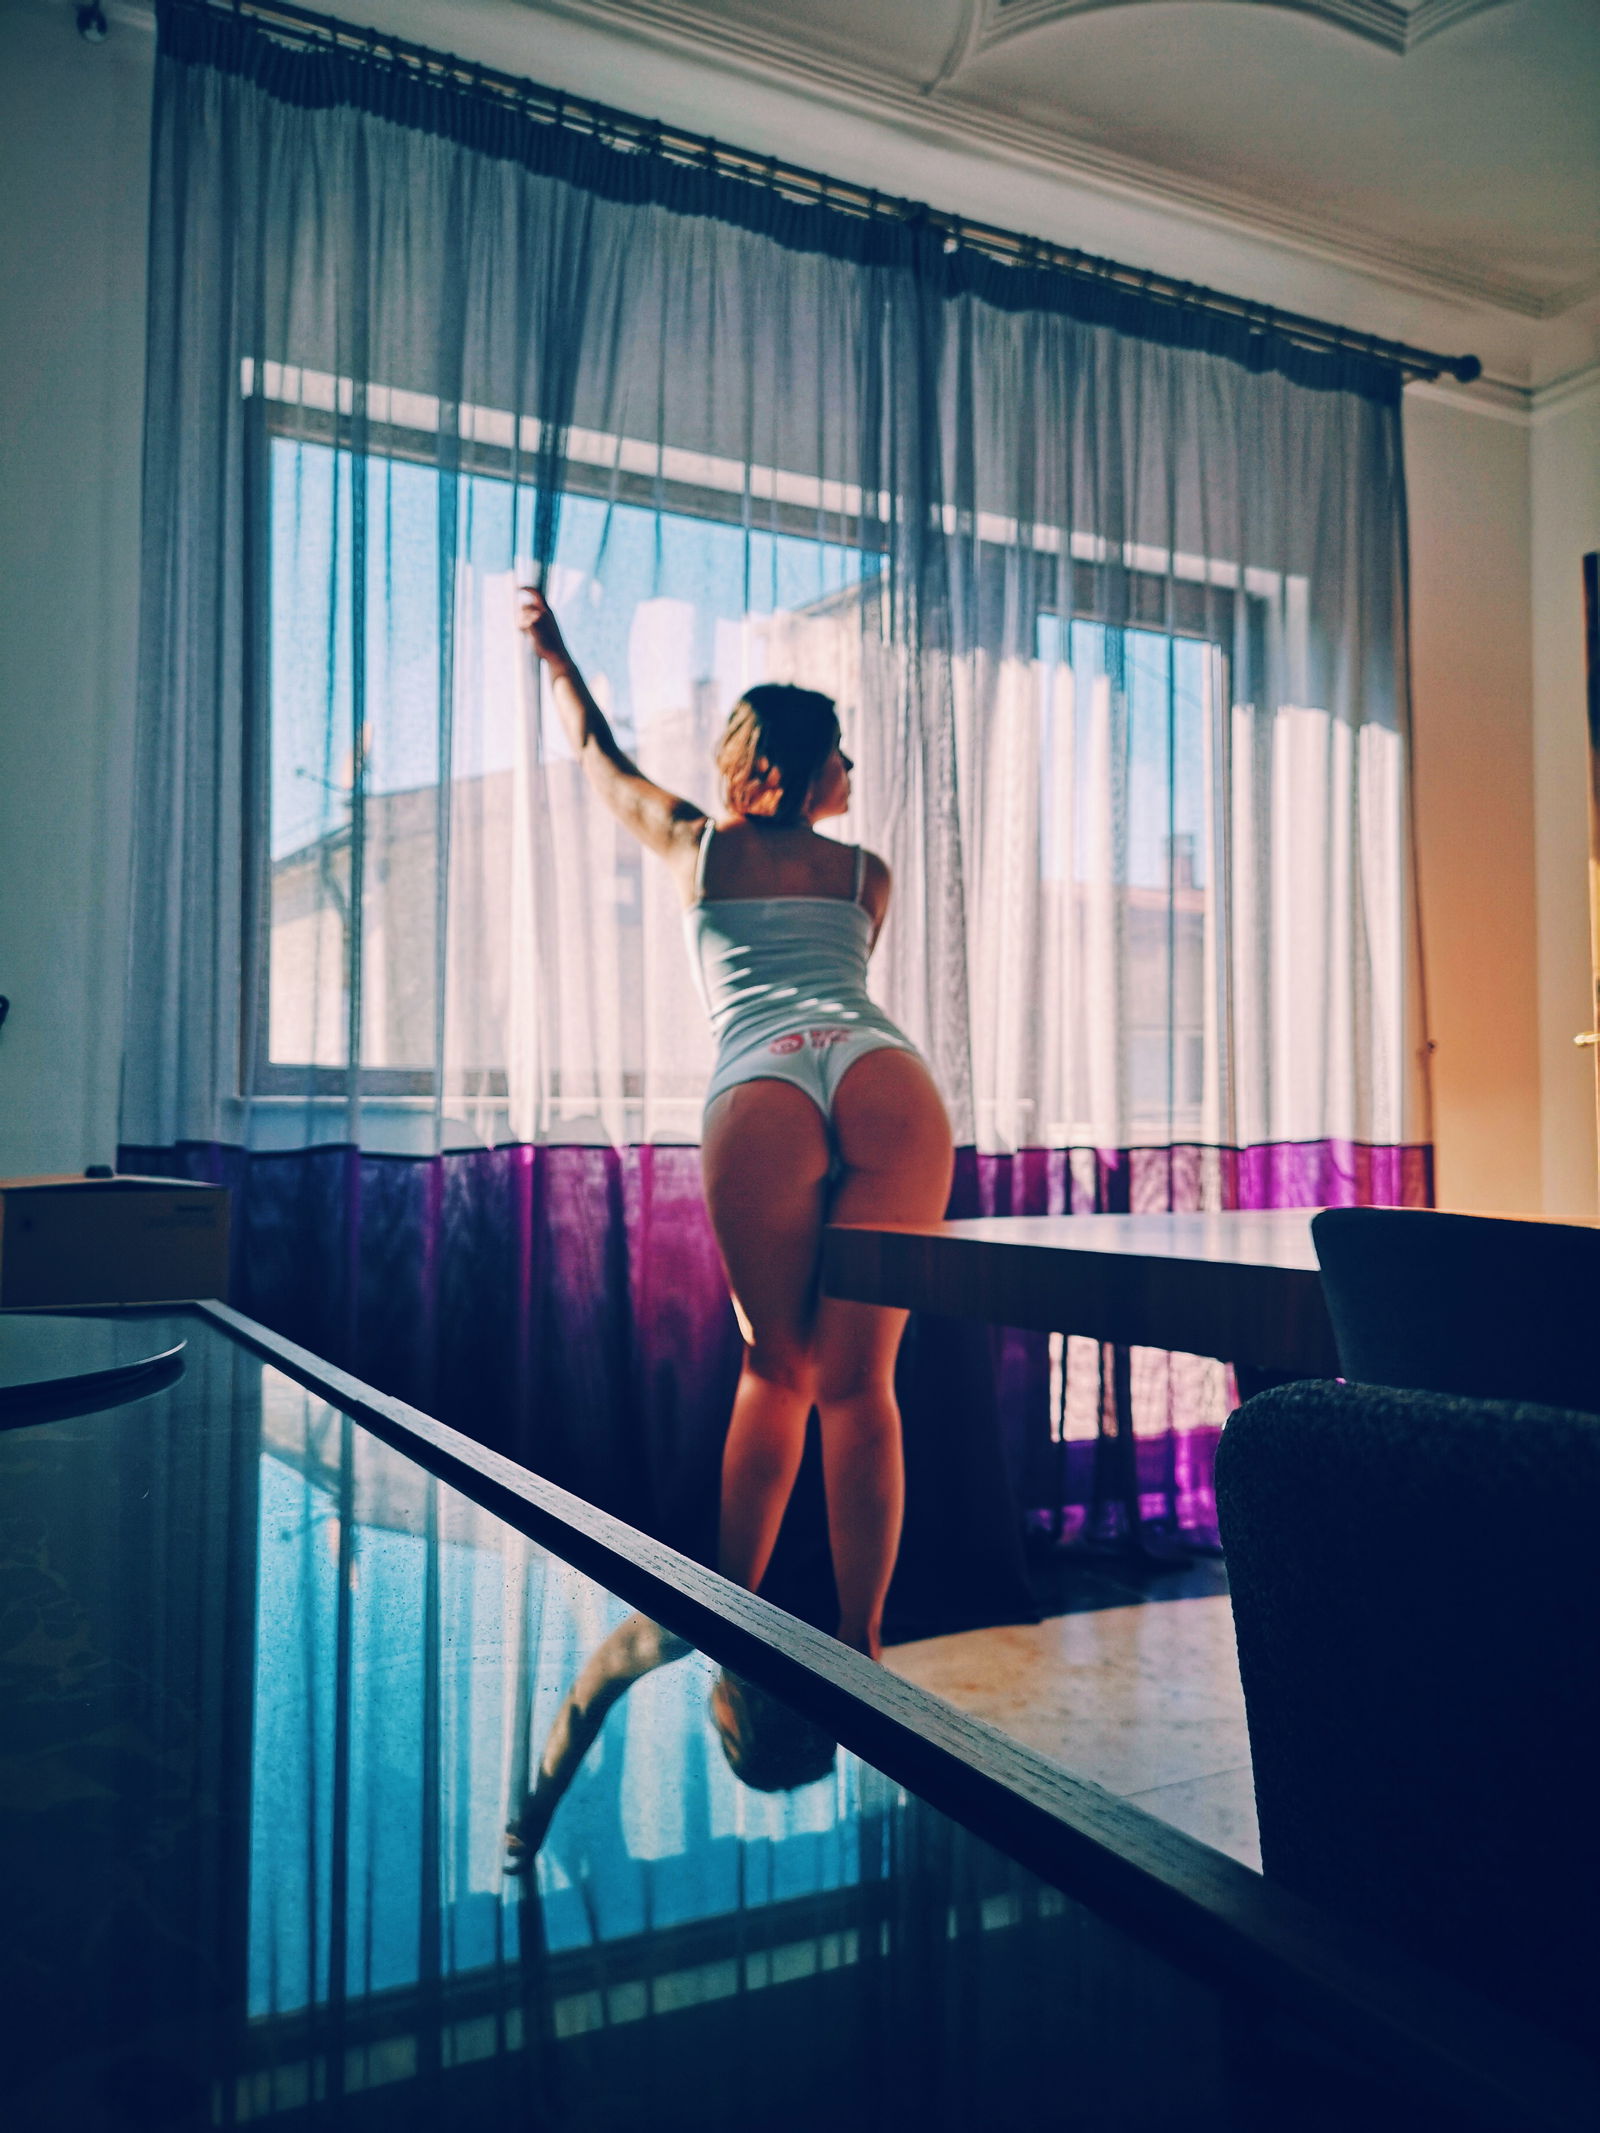 Watch the Photo by TamTam with the username @TamTam, who is a star user, posted on October 7, 2018. The post is about the topic Girls You Dream Of. and the text says 'Lazy #sundayfunday
#wesharesome
#ass
#slap
#bang
#afternoon
#hotchicks
#tamtamteam'